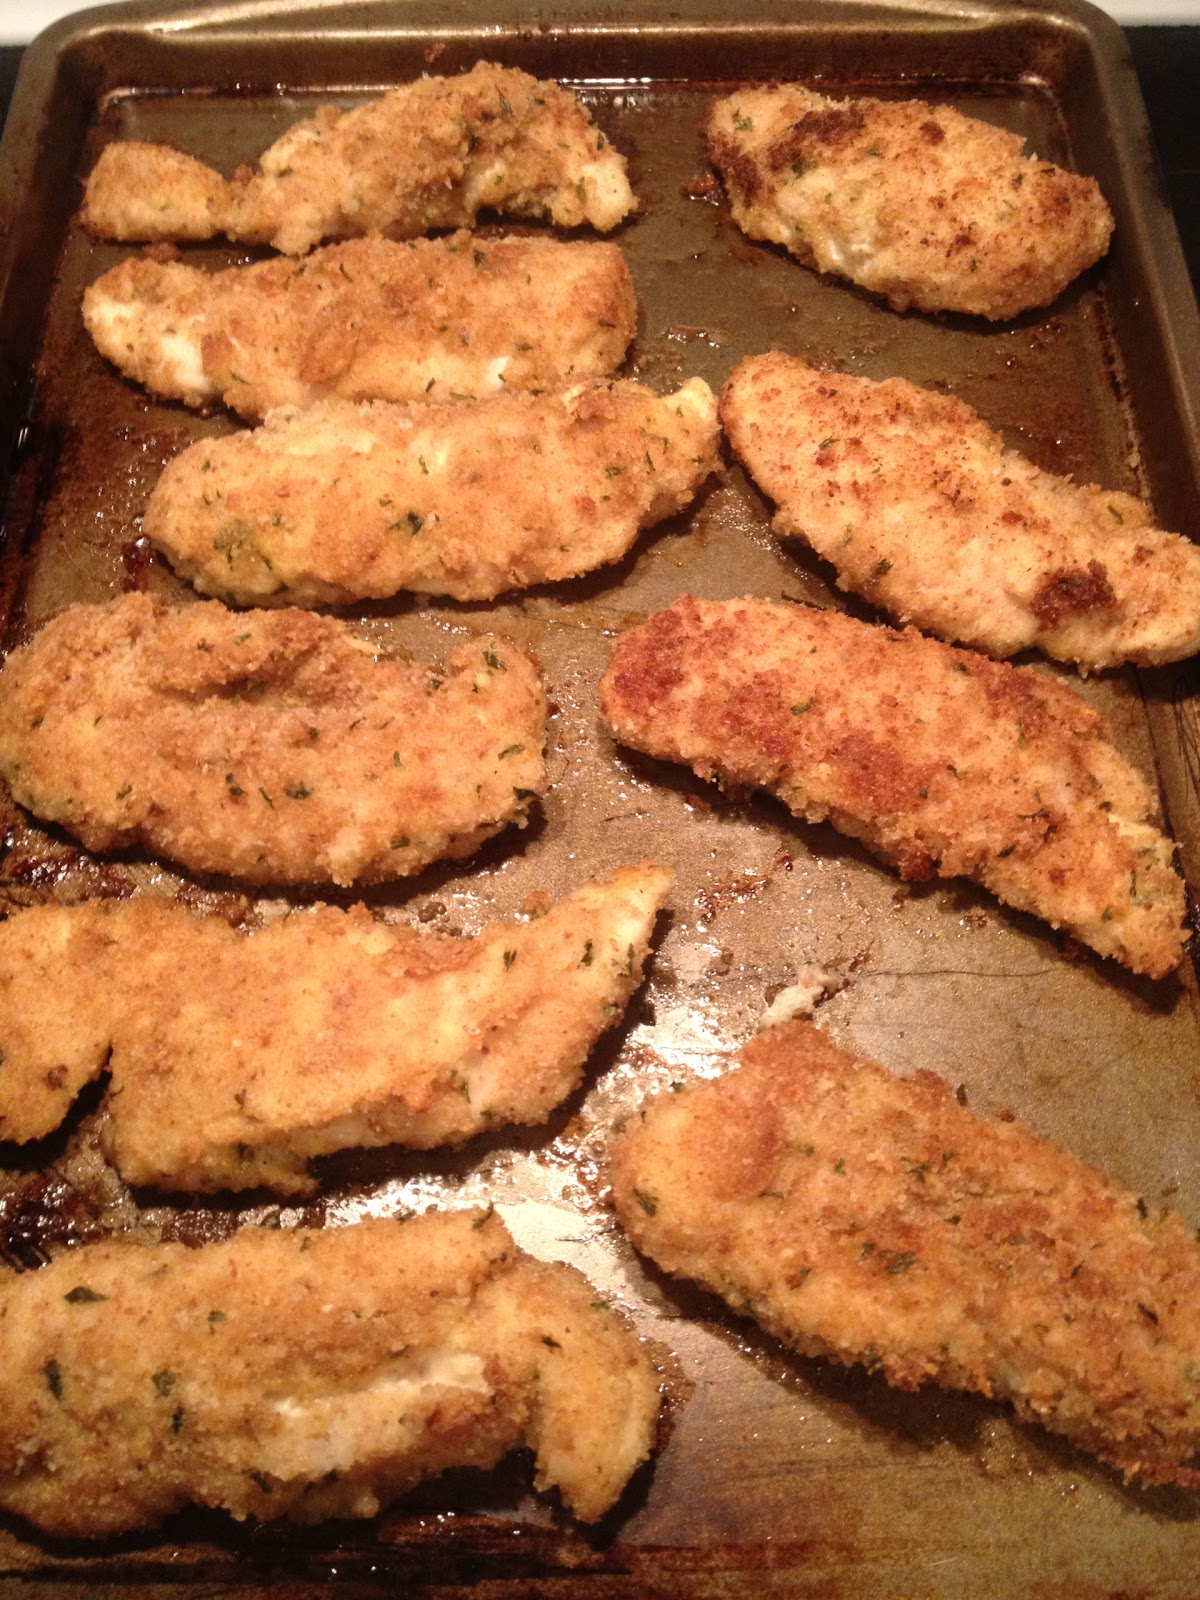 Take Time for Today: My favorite recipe for Boneless Chicken Tenders and Boneless Pork Chops